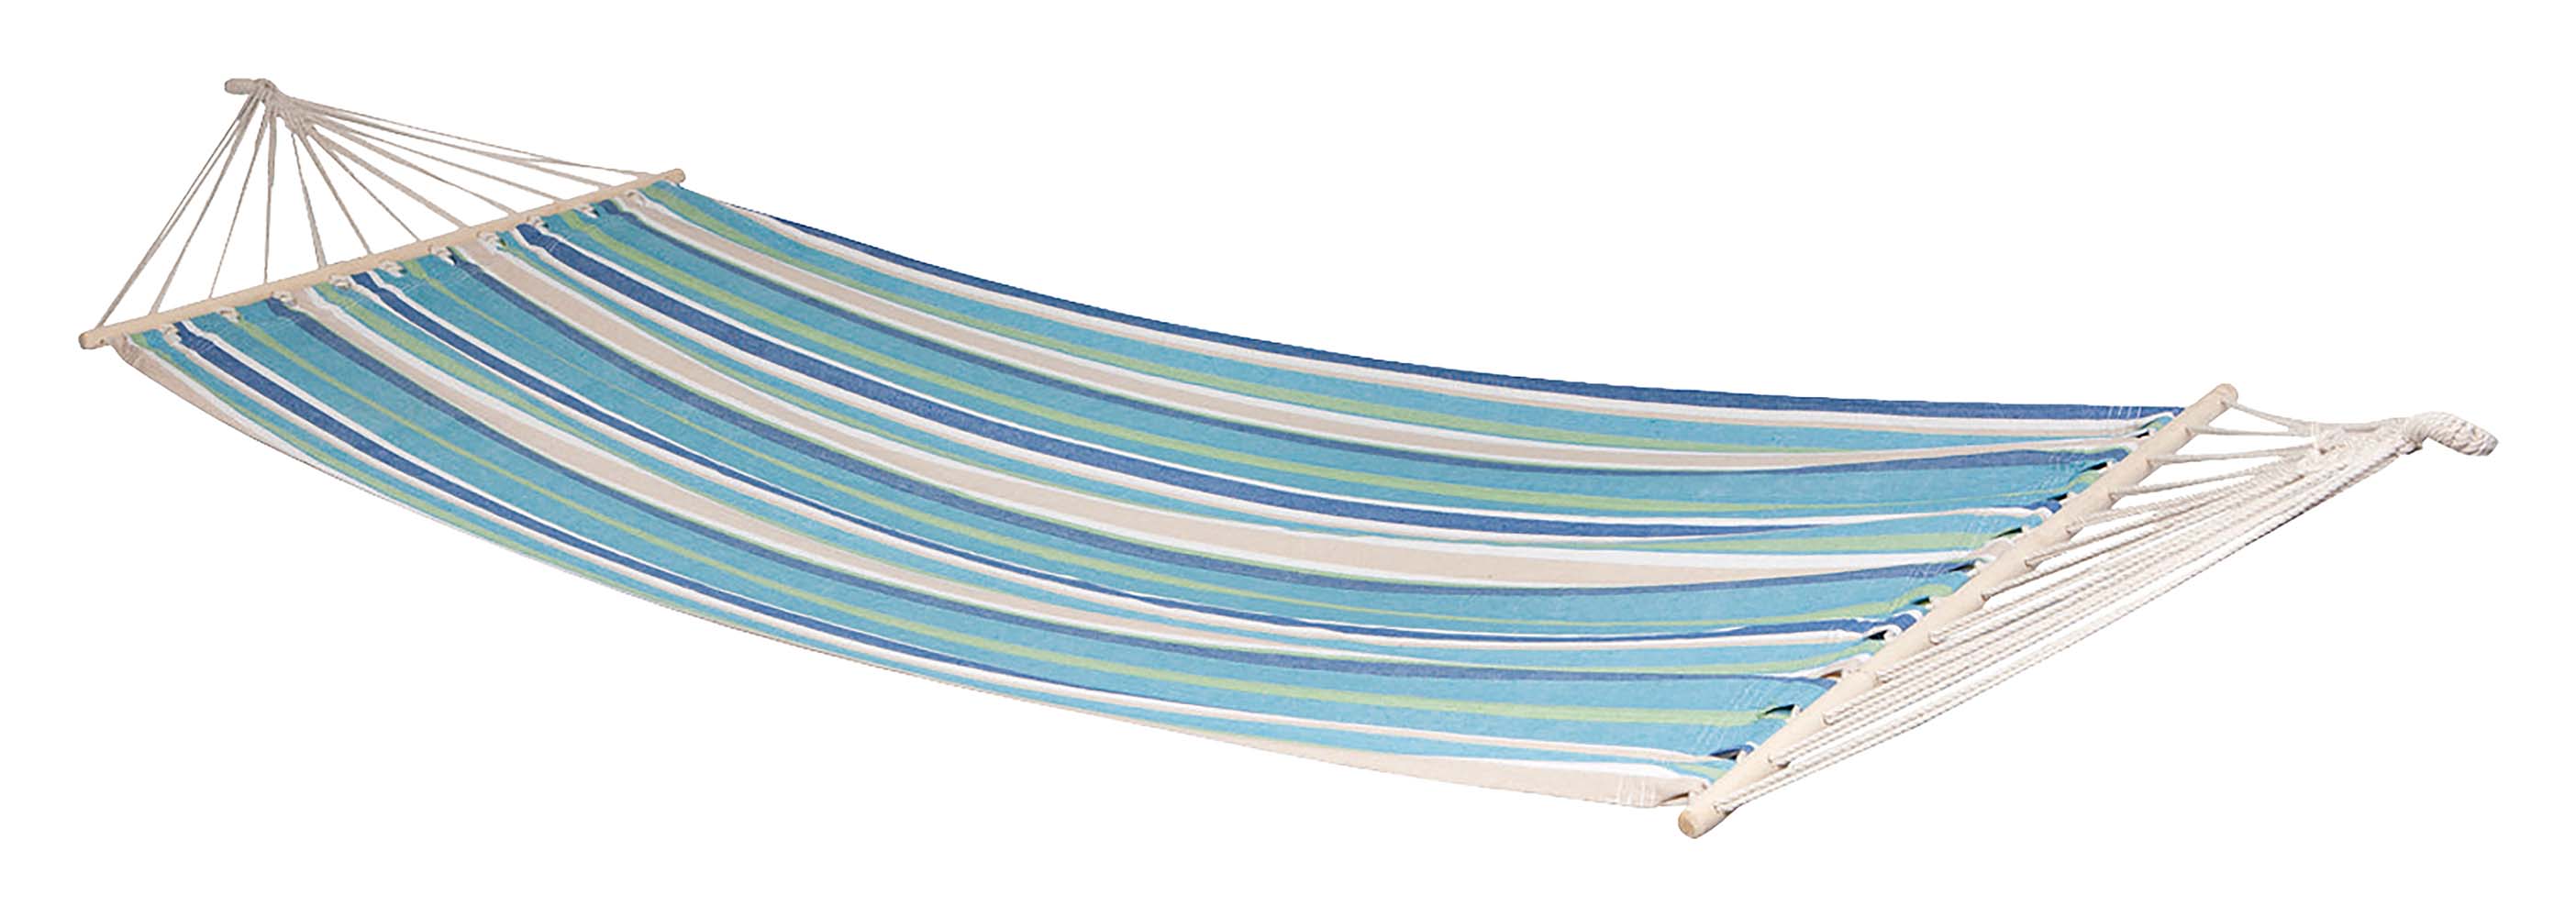 7100246 A cheerful and very sturdy hammock. To enjoy your holiday to the fullest! Made of sturdy 320gr/m² cotton/polyester. The hammock has a spreading stick of 118 cm on the ends so that the fabric is always fully open. Maximum load-bearing capacity: 200 kilograms.